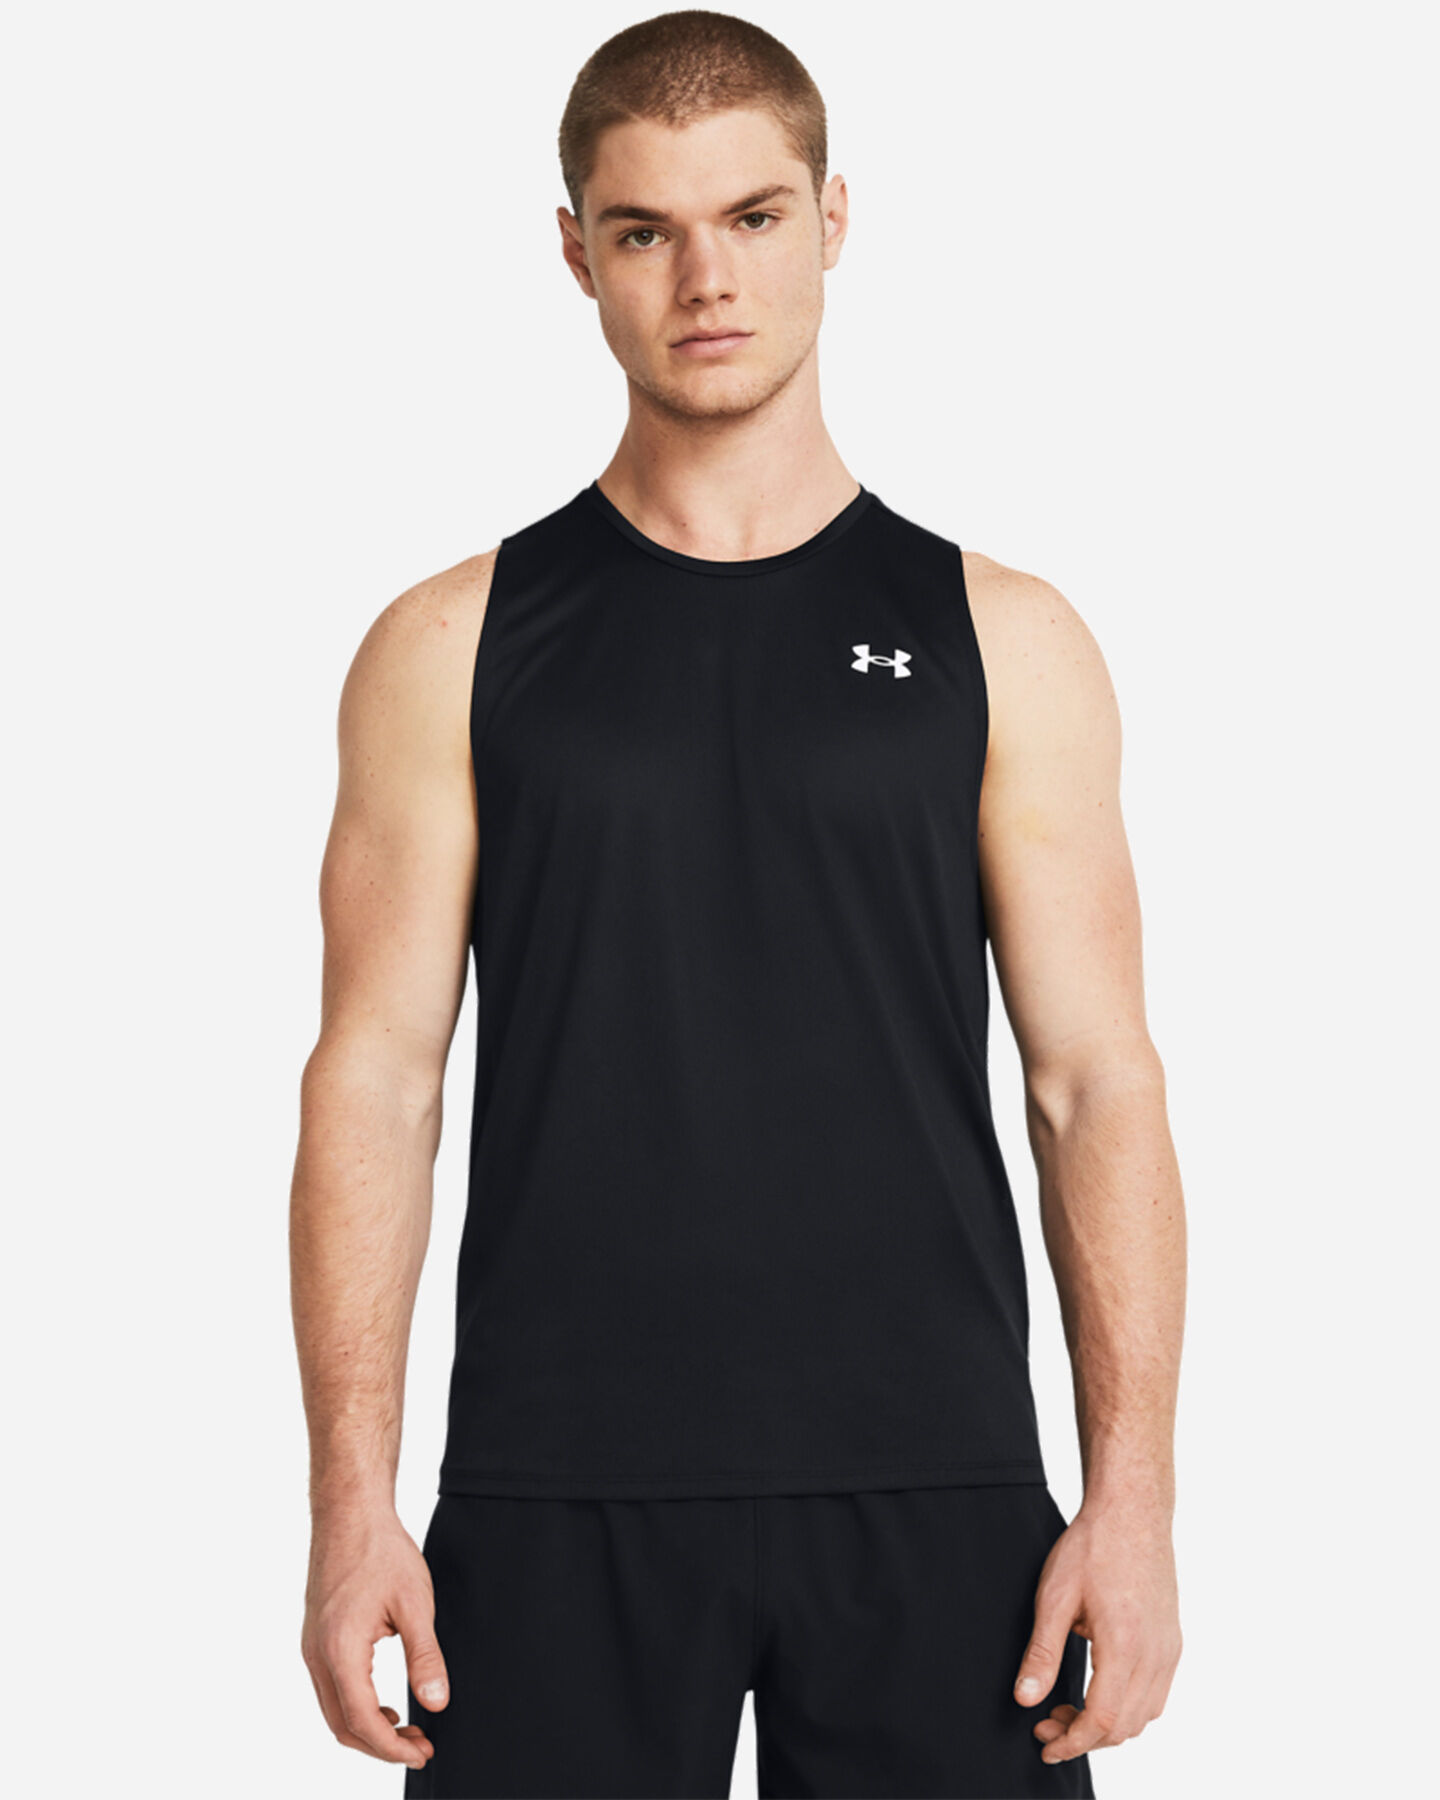  Canotta training UNDER ARMOUR TECH M S5641581|0001|XS scatto 2